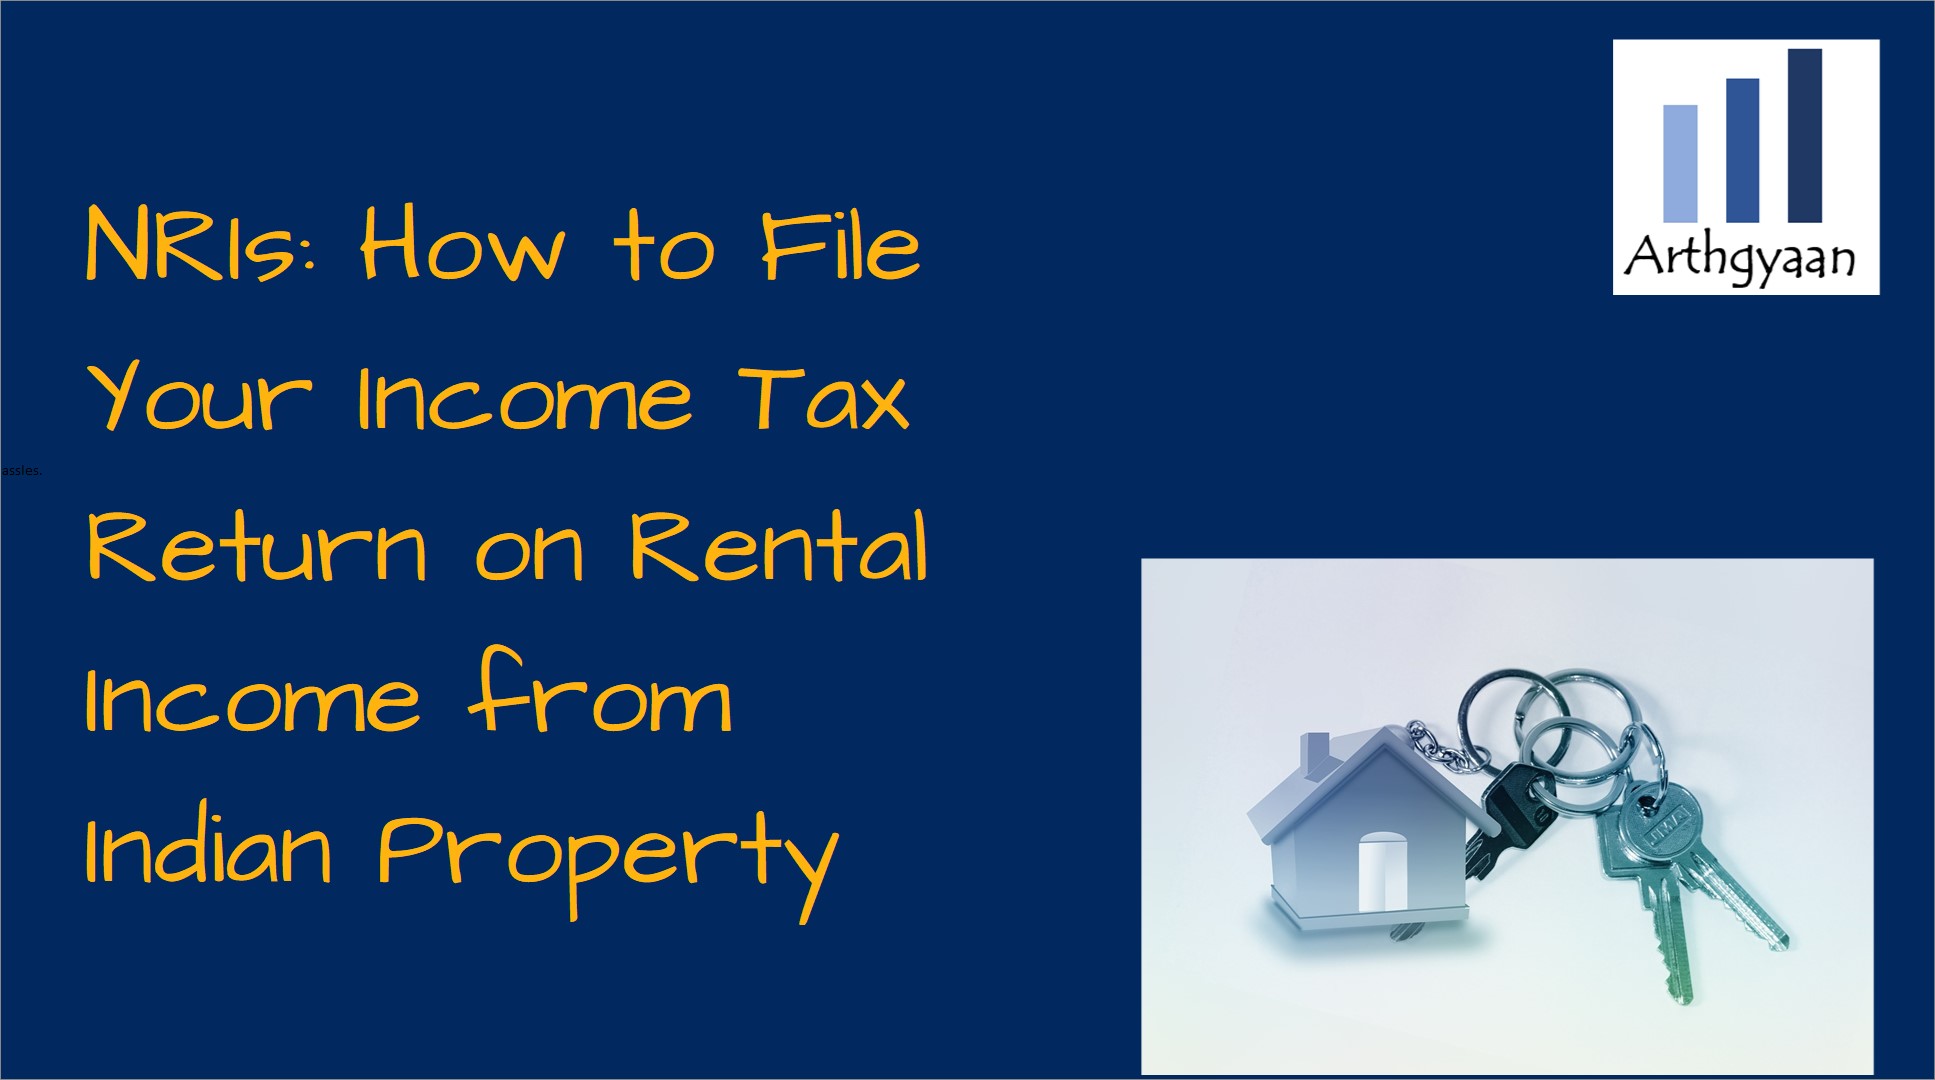 NRIs: How to File Your Income Tax Return on Rental Income from Indian Property